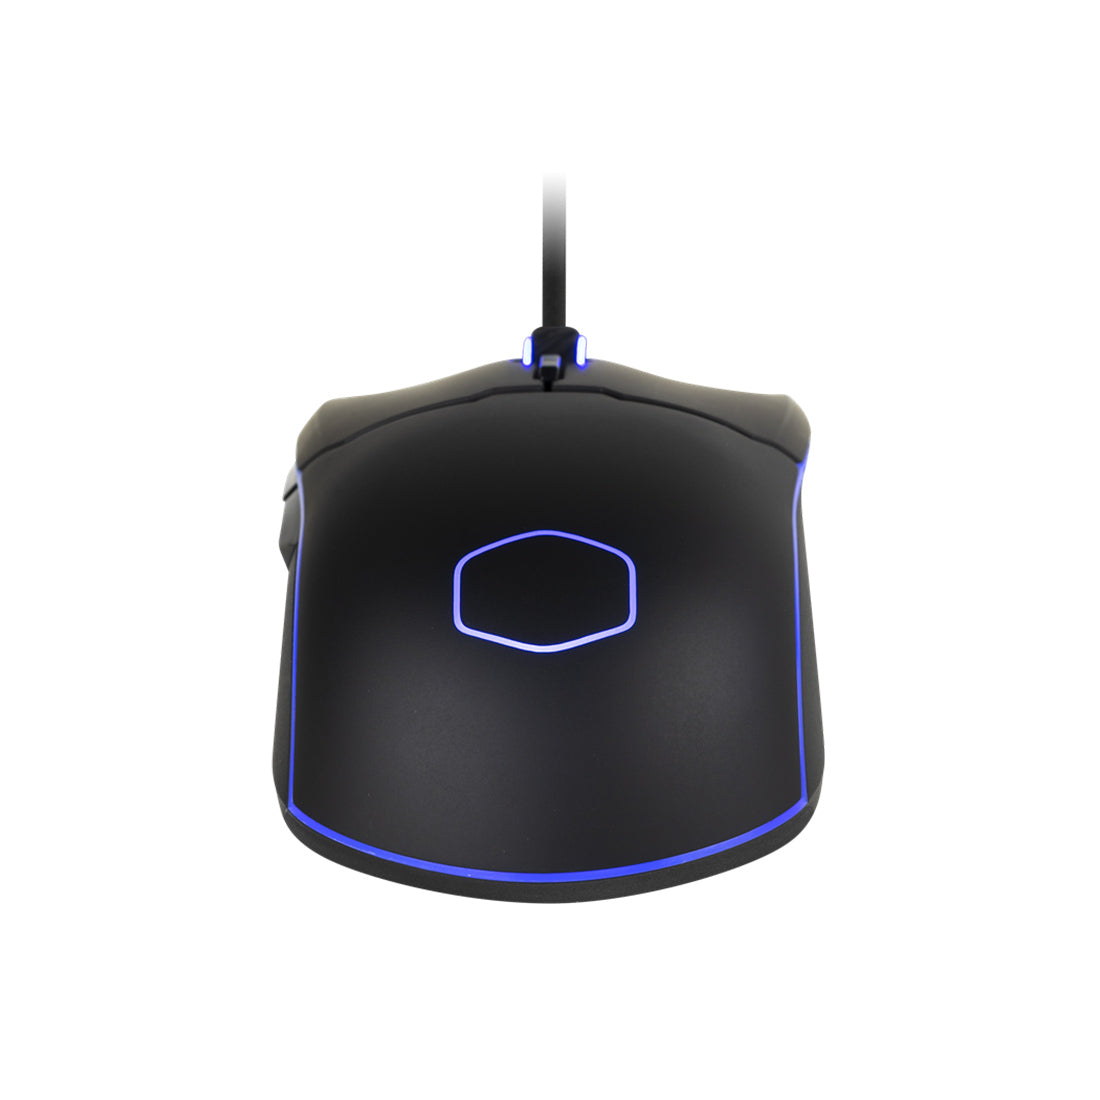 [RePacked] Cooler Master CM110 RGB Optical Gaming Mouse with Variable DPI and Customizable Buttons